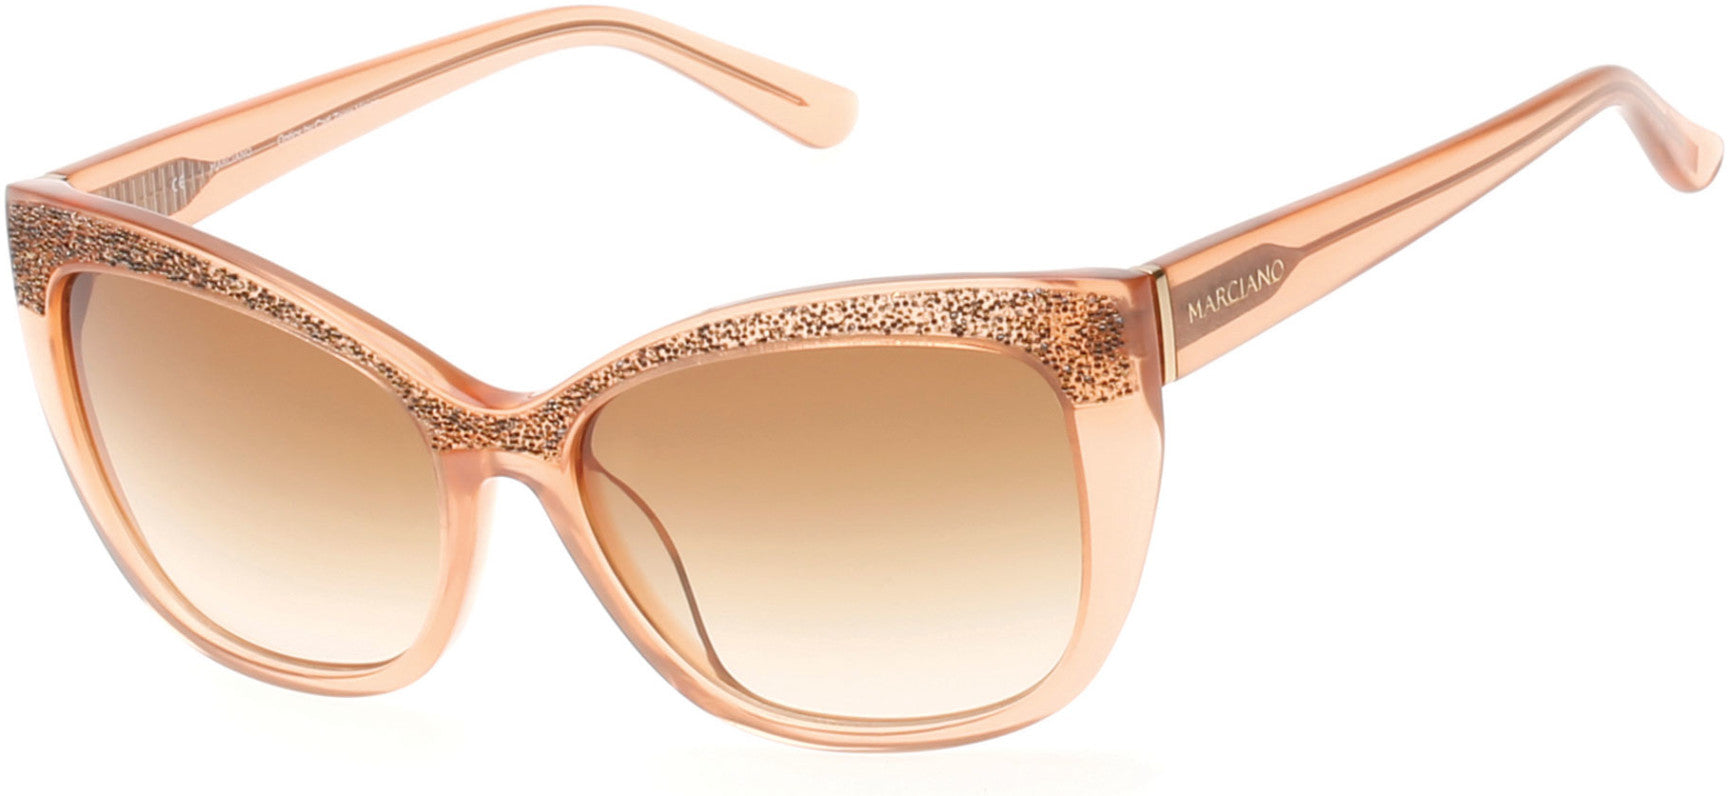 Guess By Marciano GM0730 Sunglasses 45F-45F - Shiny Light Brown / Gradient Brown